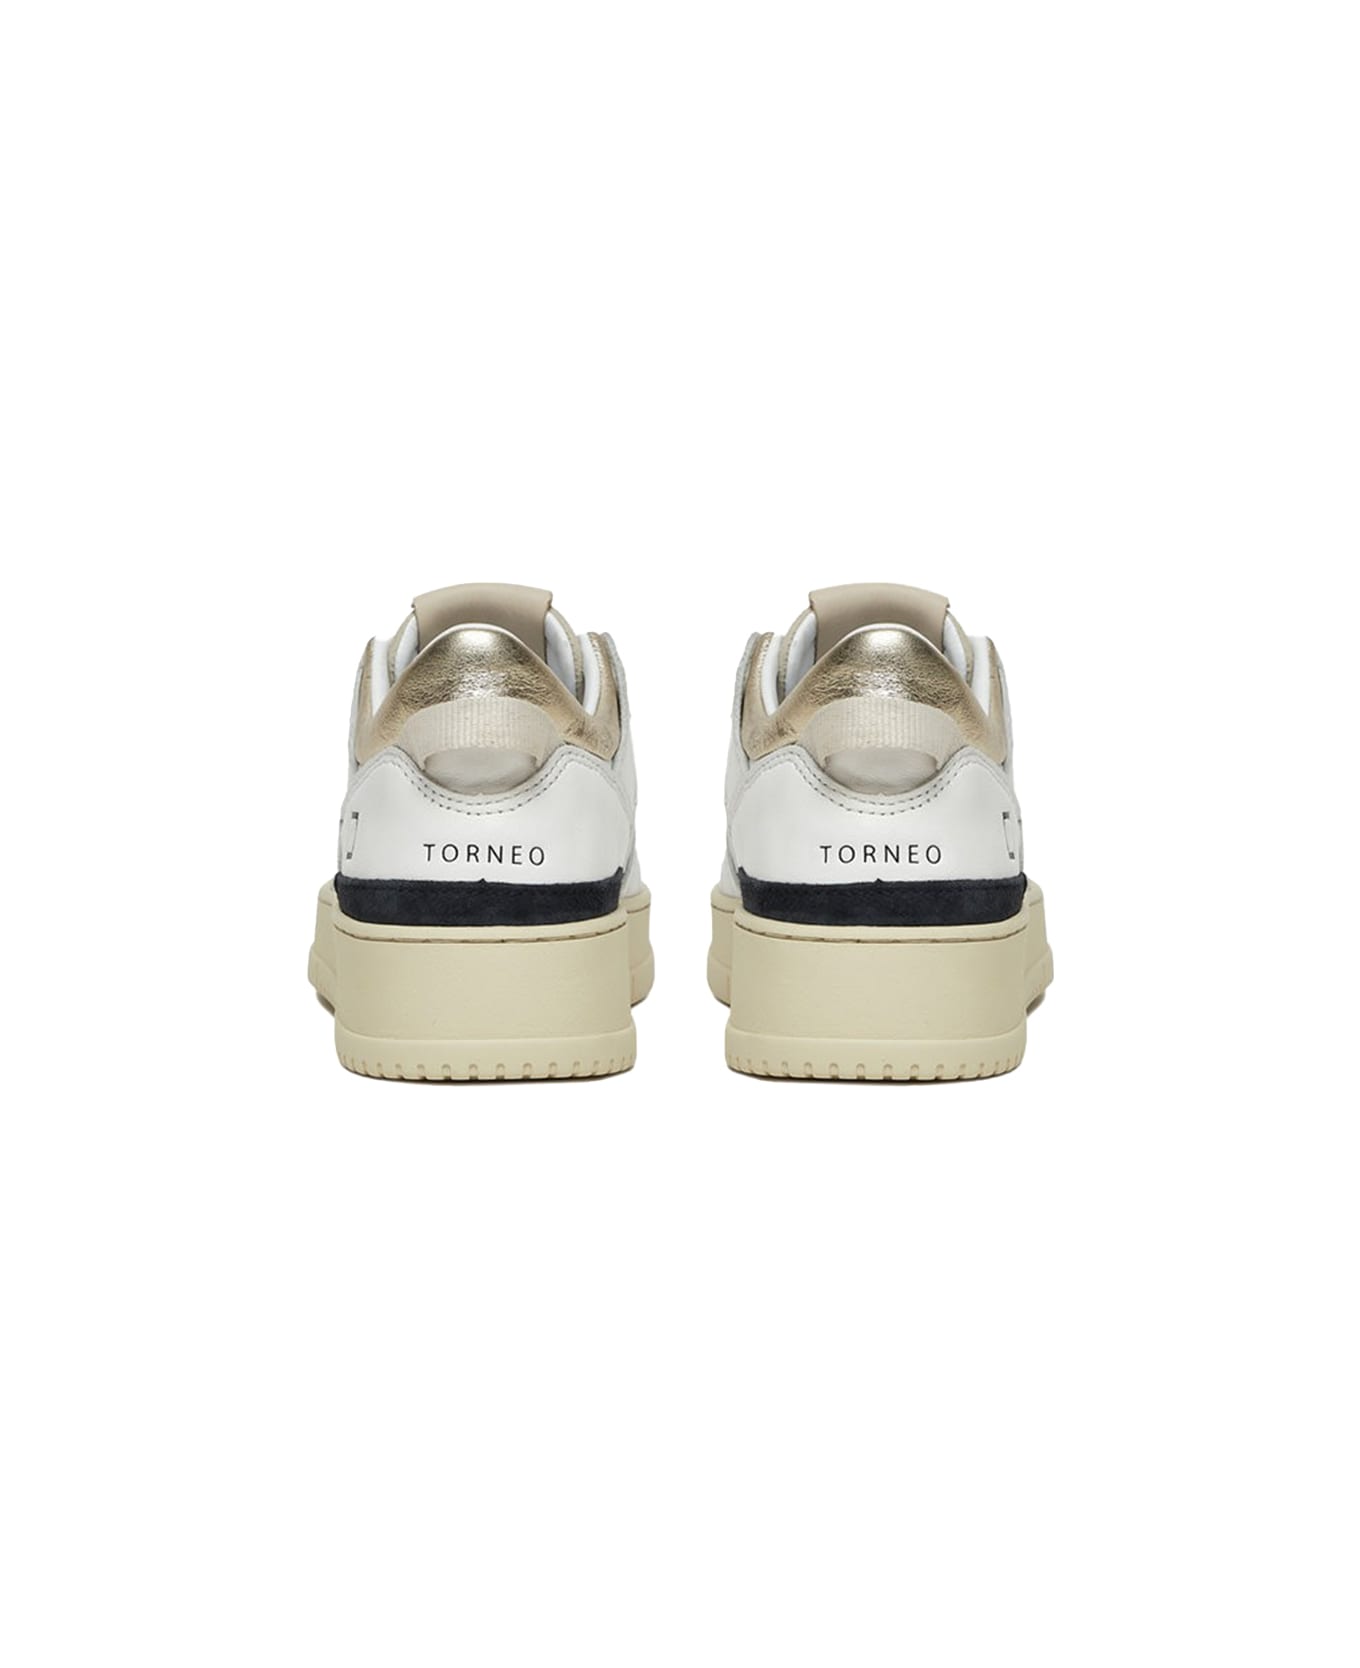 D.A.T.E. Women's Torneo White Gold Leather Sneaker スニーカー